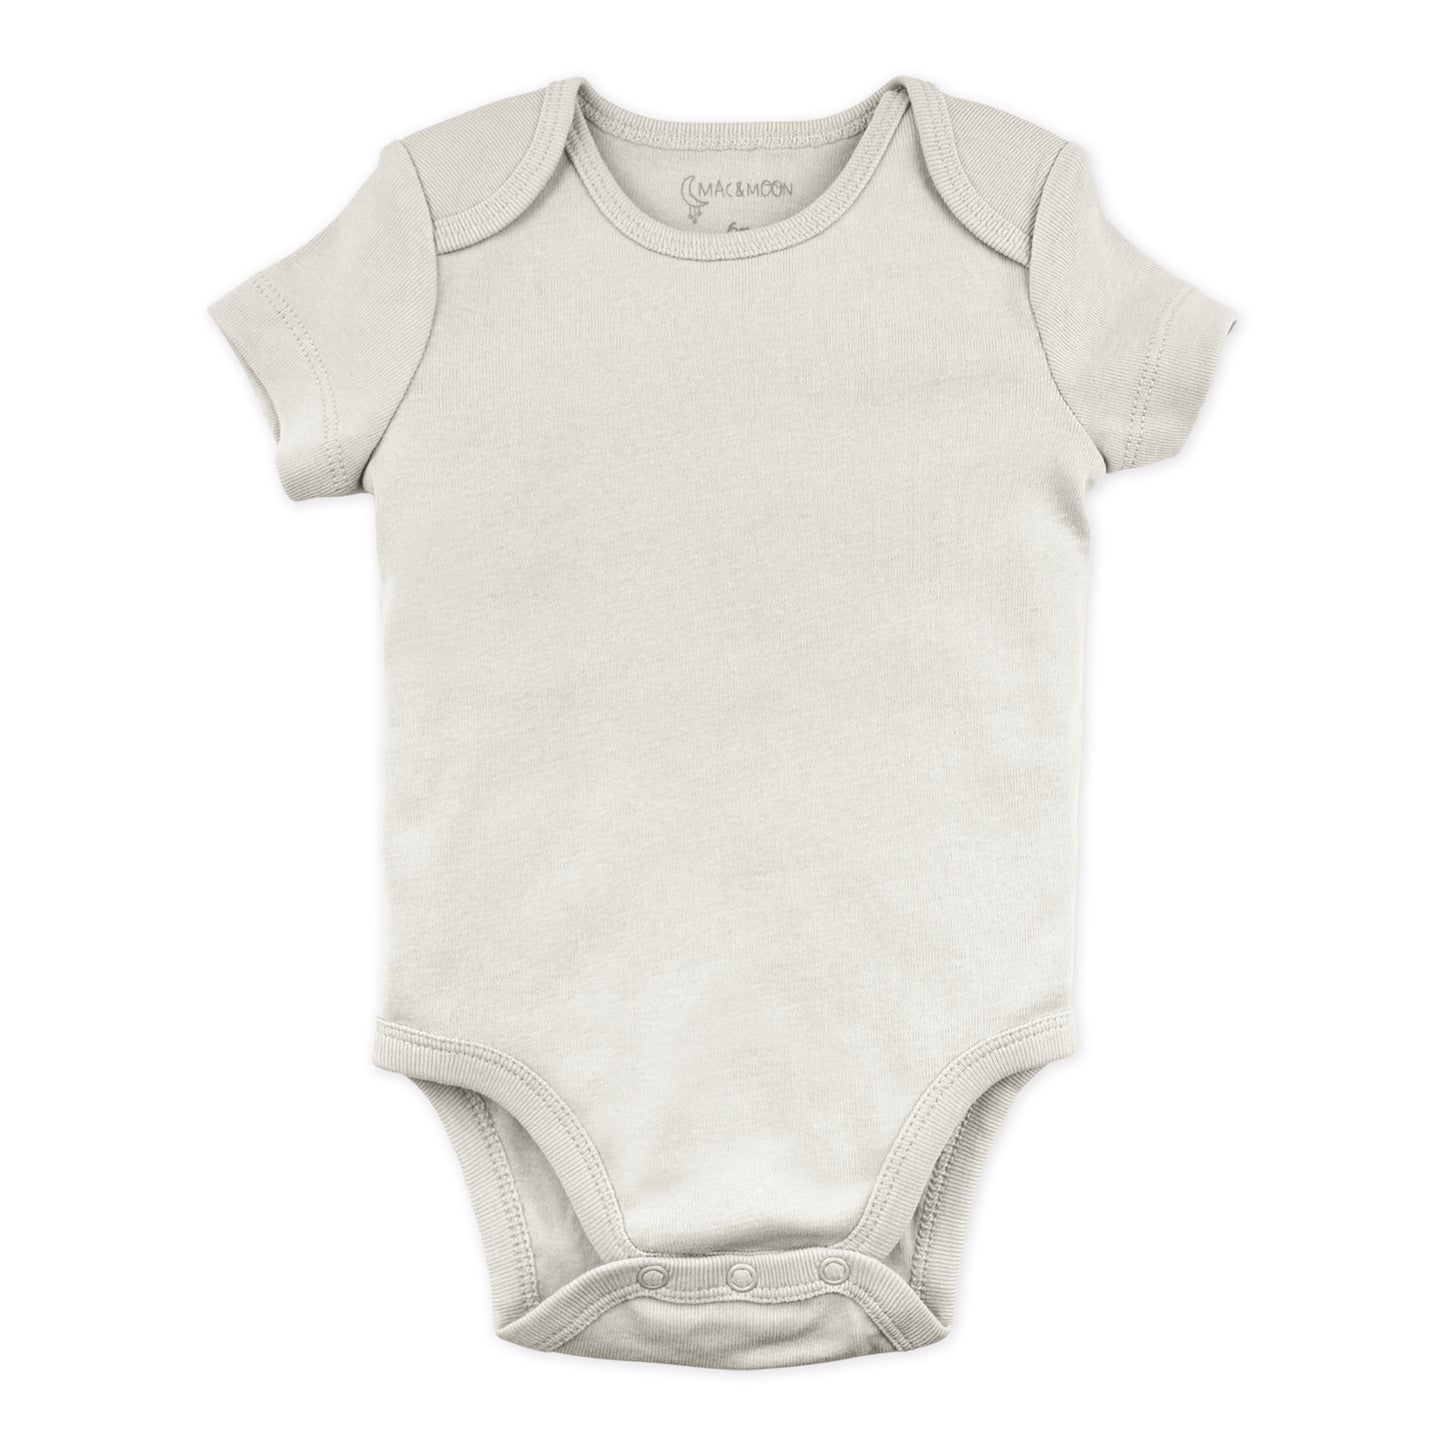 5-Pack Organic Cotton Bodysuit in Turtle Colors